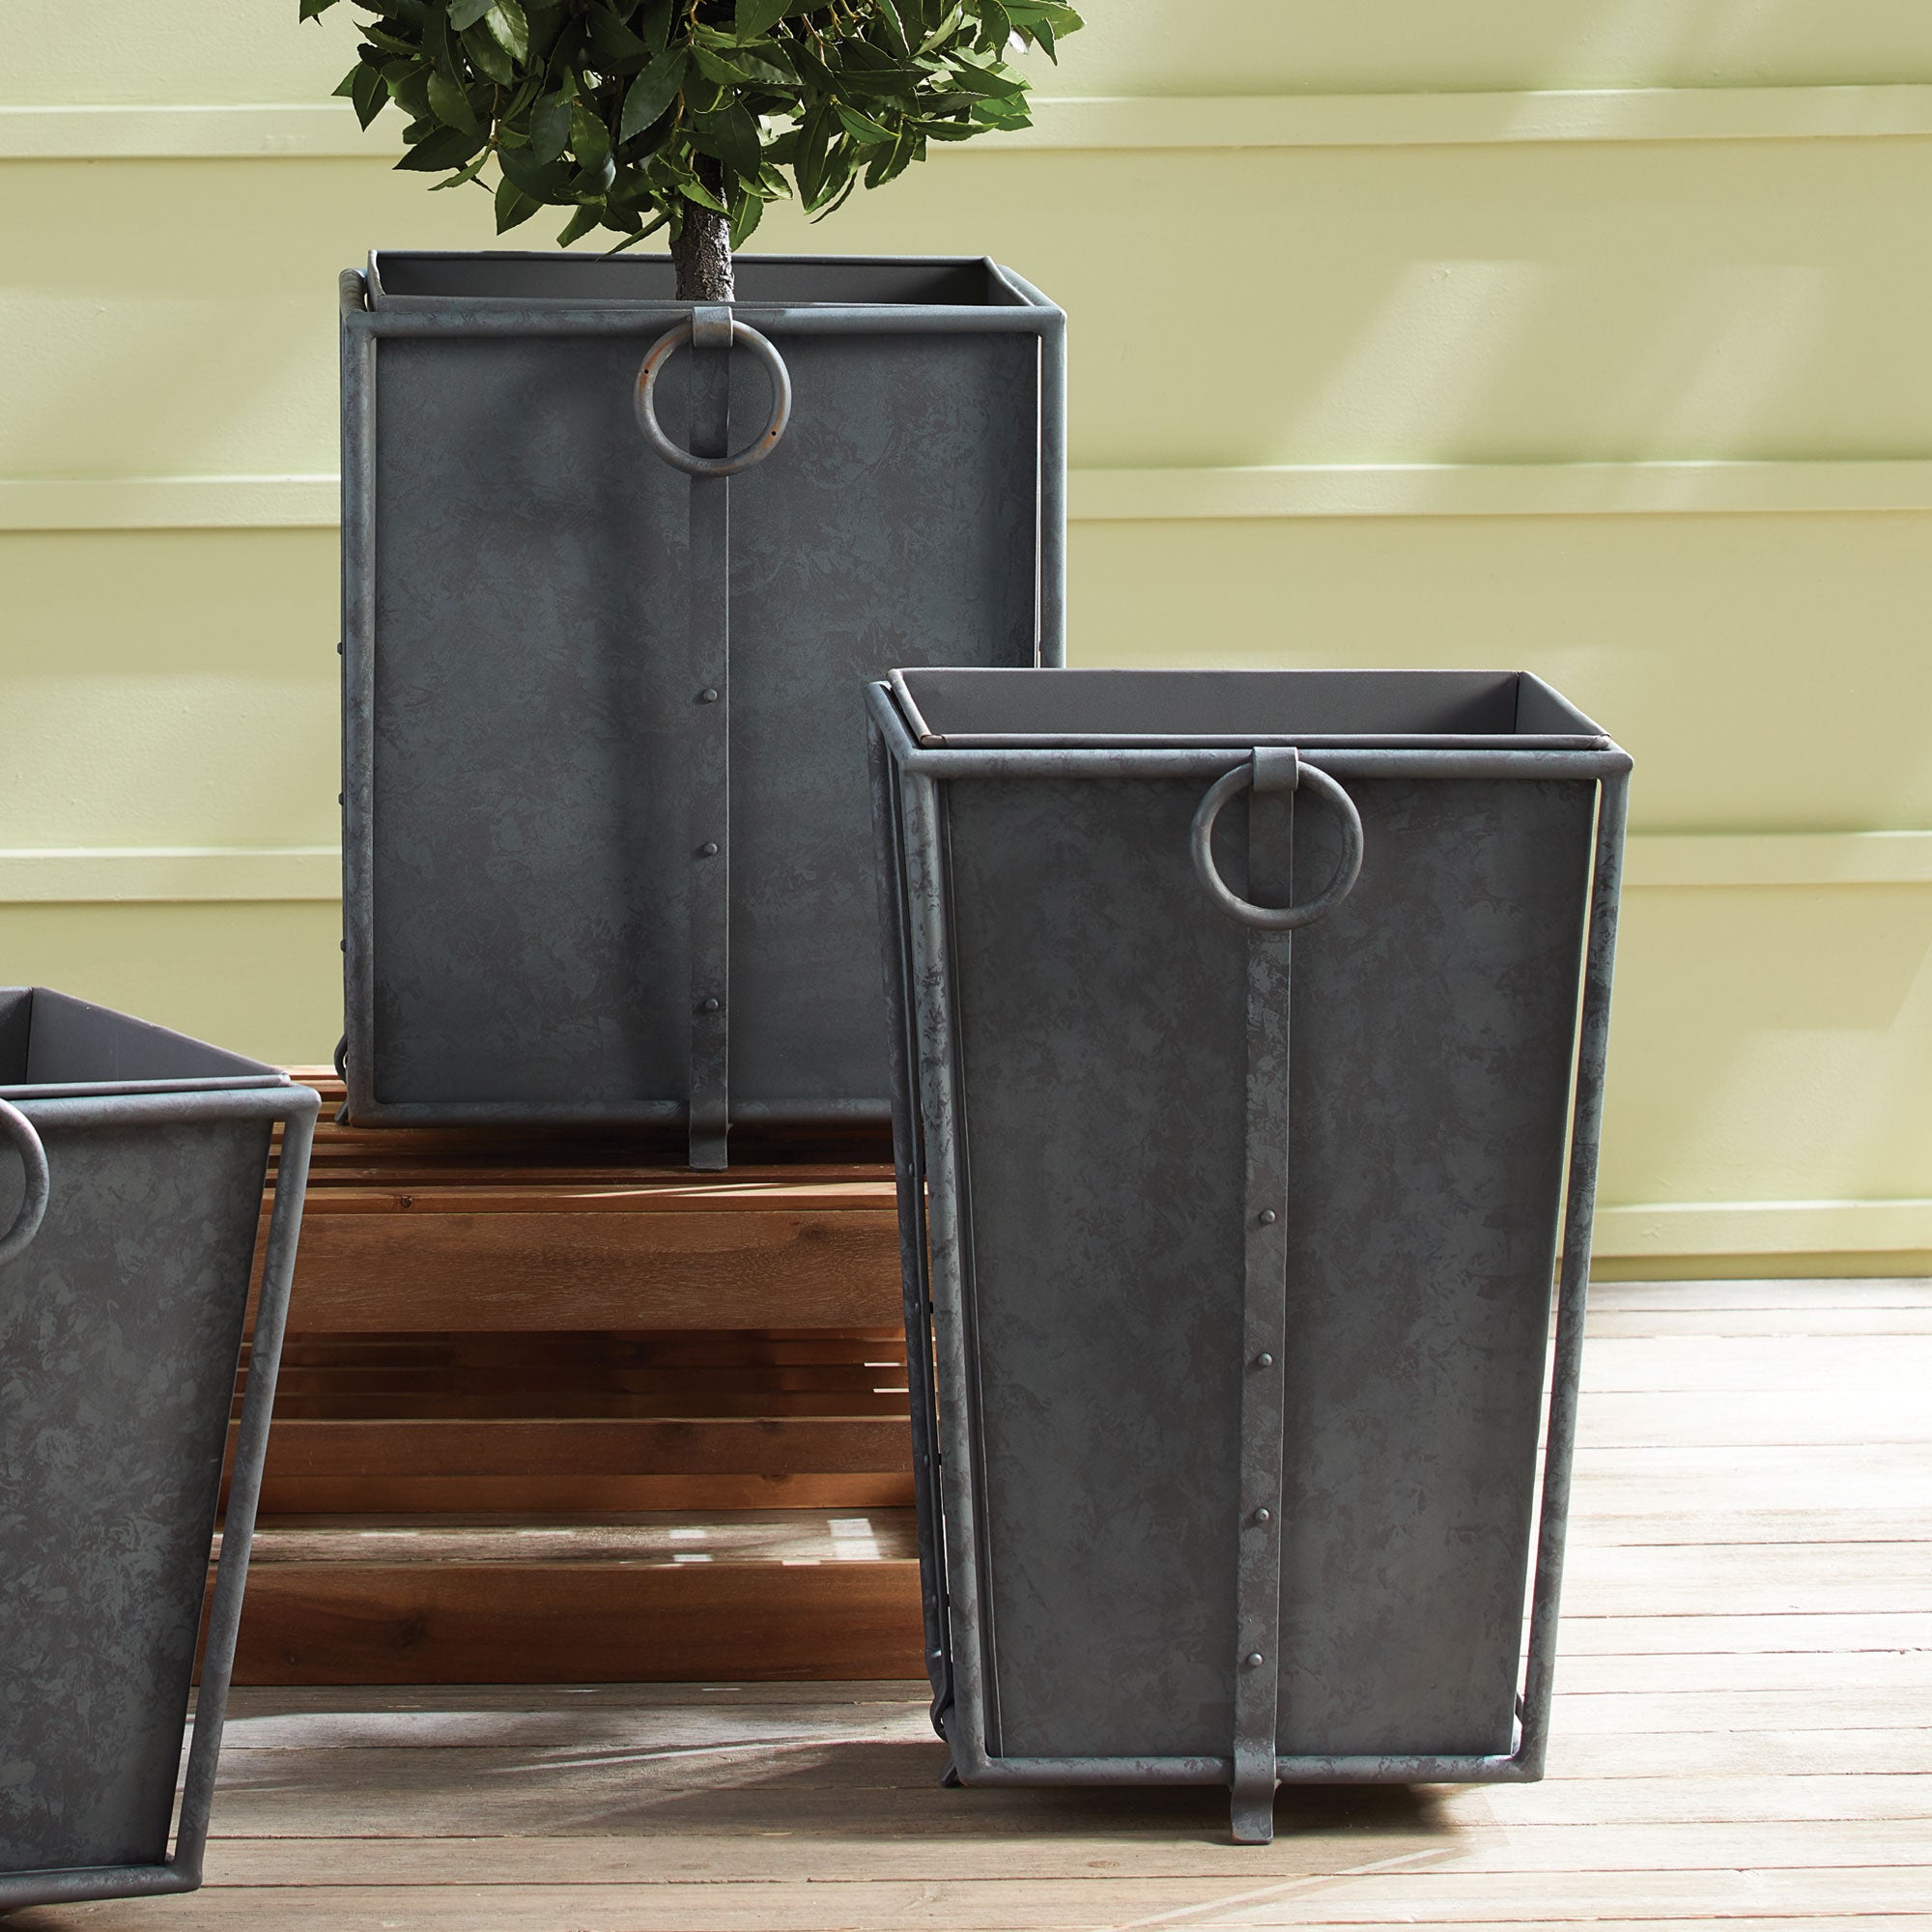 With metal liners that easily slide out, the Callahan Square Planter is as practical as it is handsome. The rounded handles and traditional design make it an outdoor classic. Amethyst Home provides interior design, new construction, custom furniture, and area rugs in the Washington metro area.